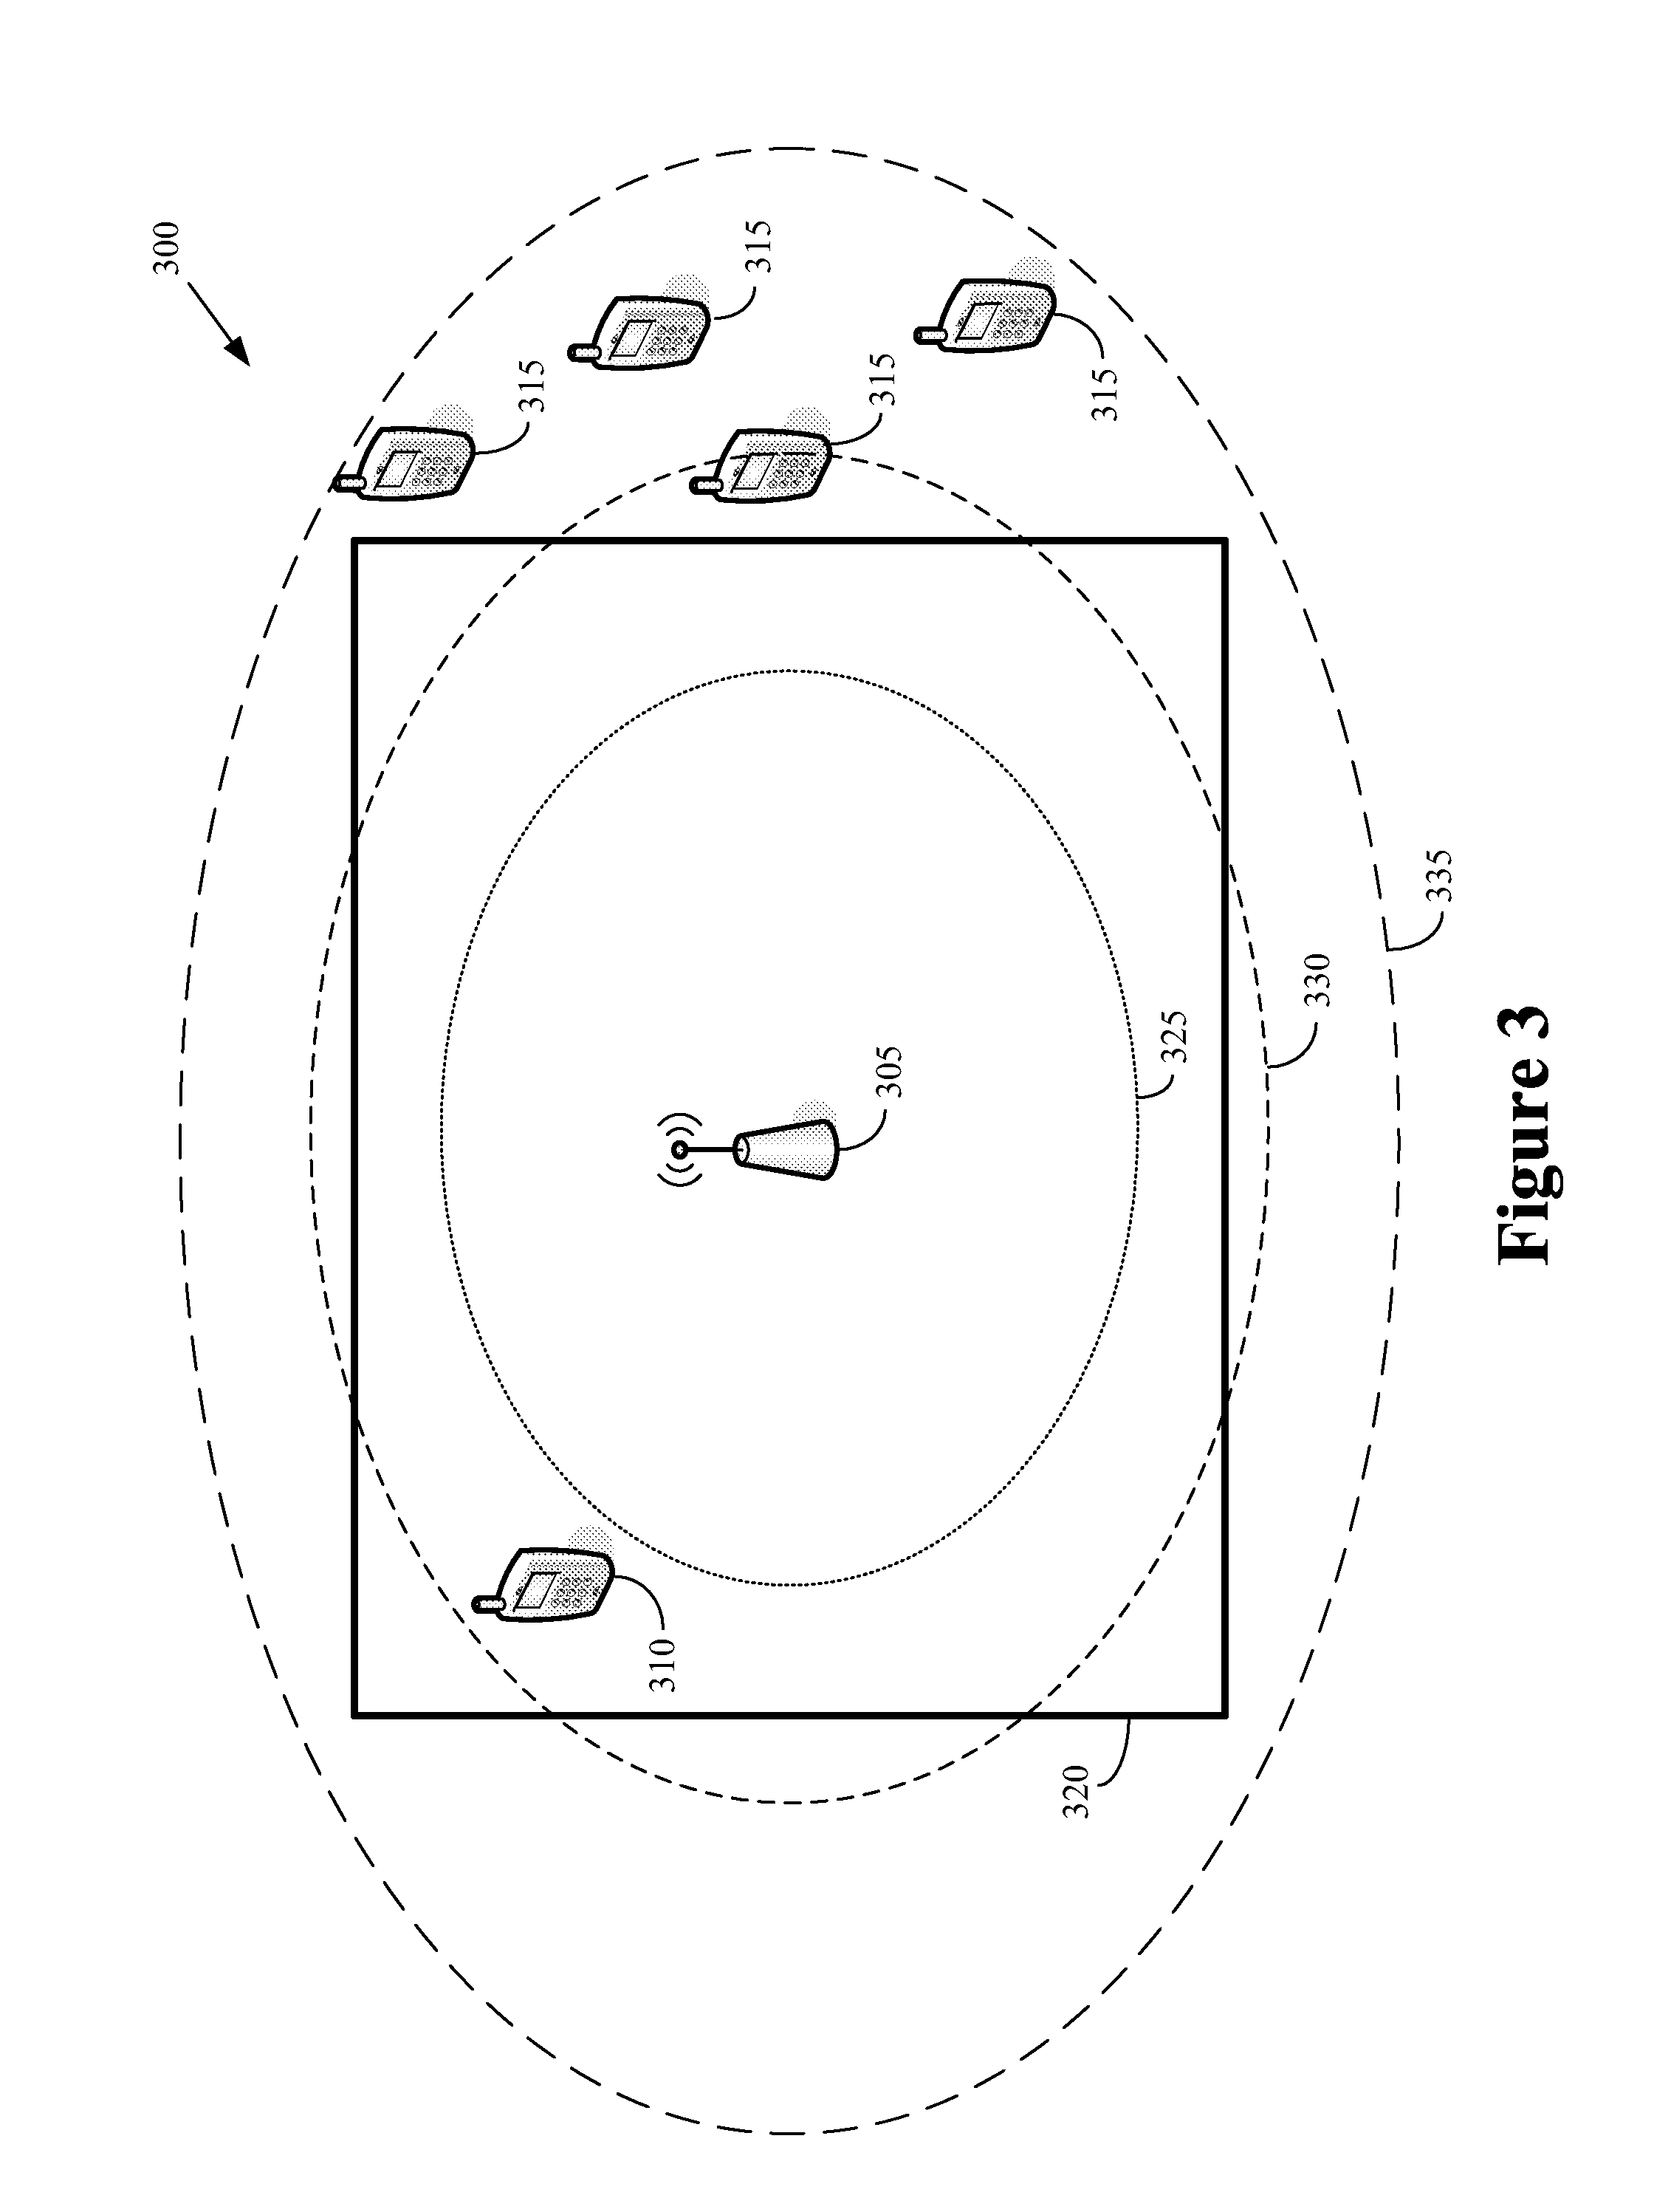 Method of modifying pilot power for a home base station router based on user demand